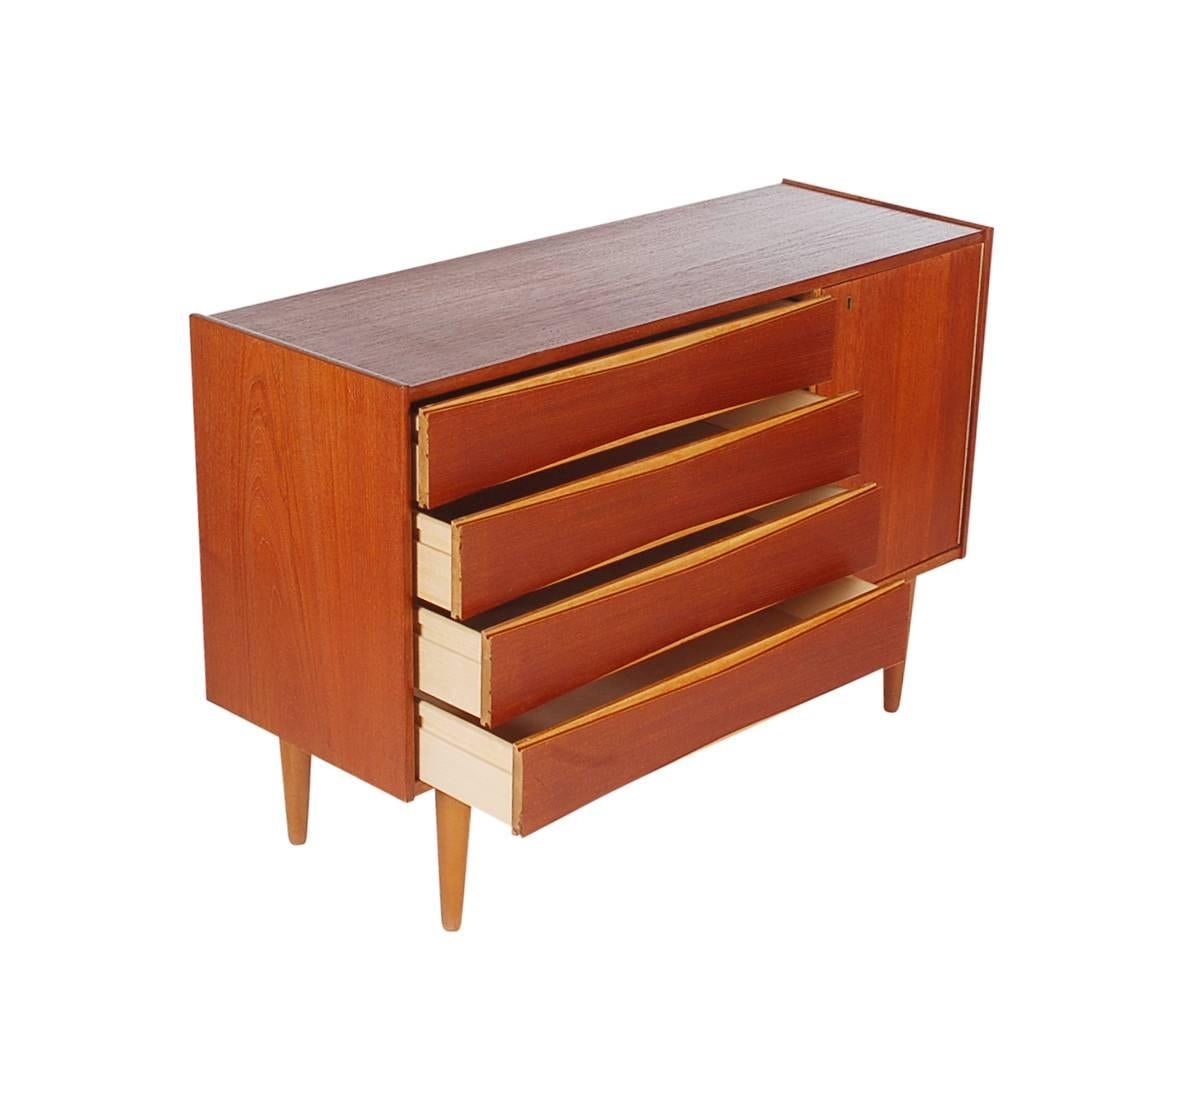 A simple and different looking designed cabinet in the manner of Arne Vodder. It features teak construction with four drawers and a storage area with shelf.